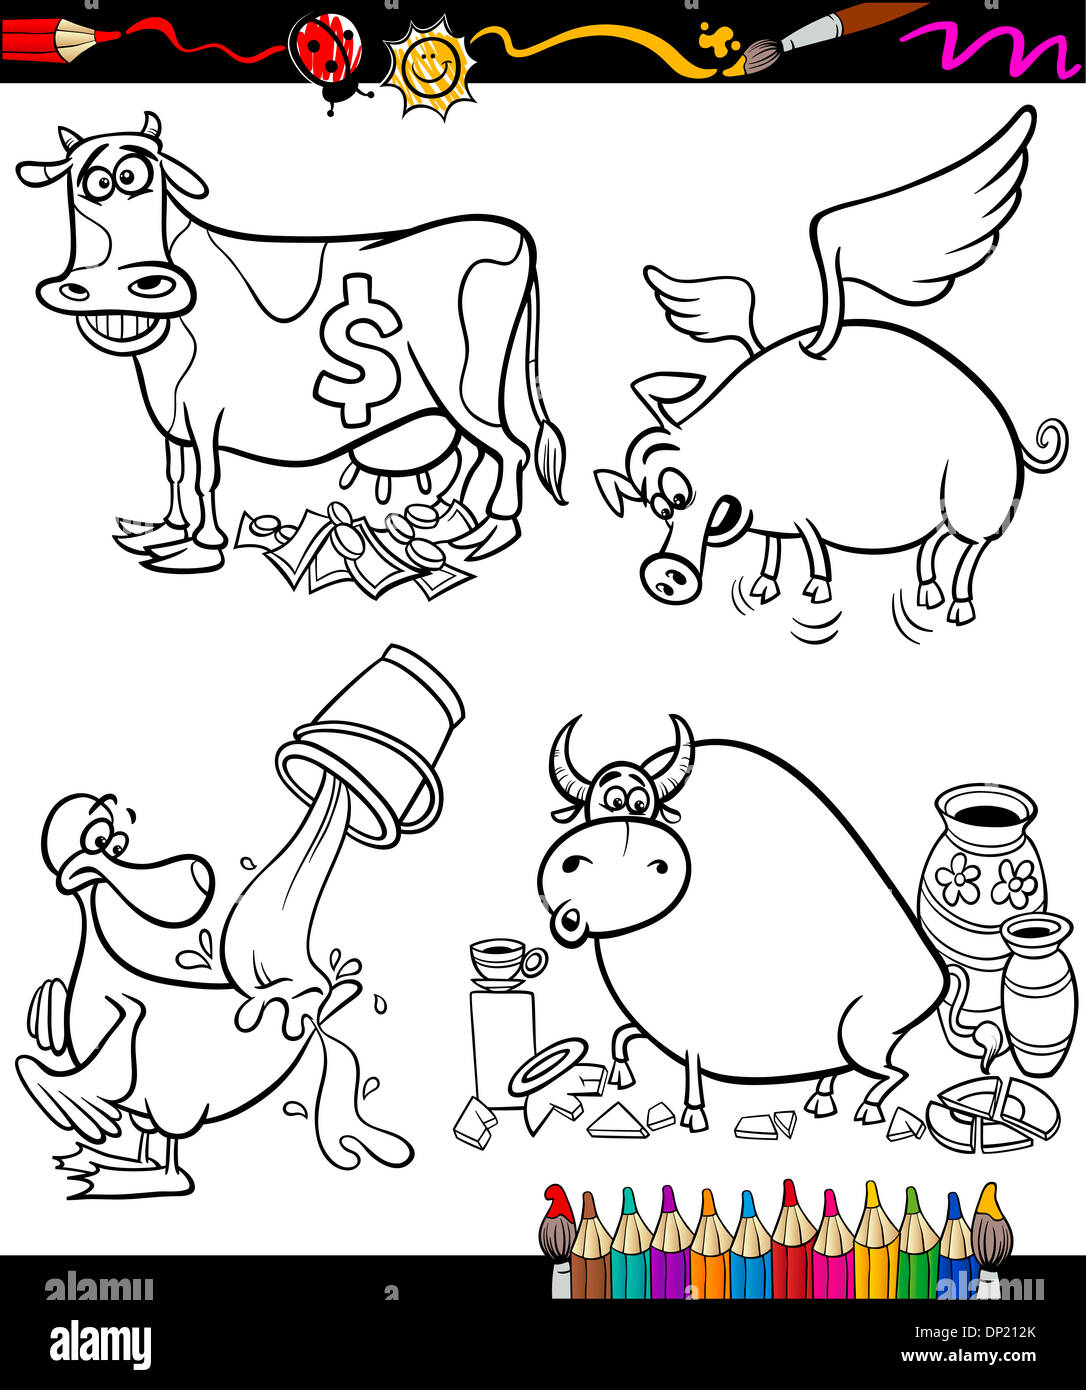 Coloring Book or Page Cartoon Illustration Set of Black and White Sayings or Proverbs for Children Stock Photo